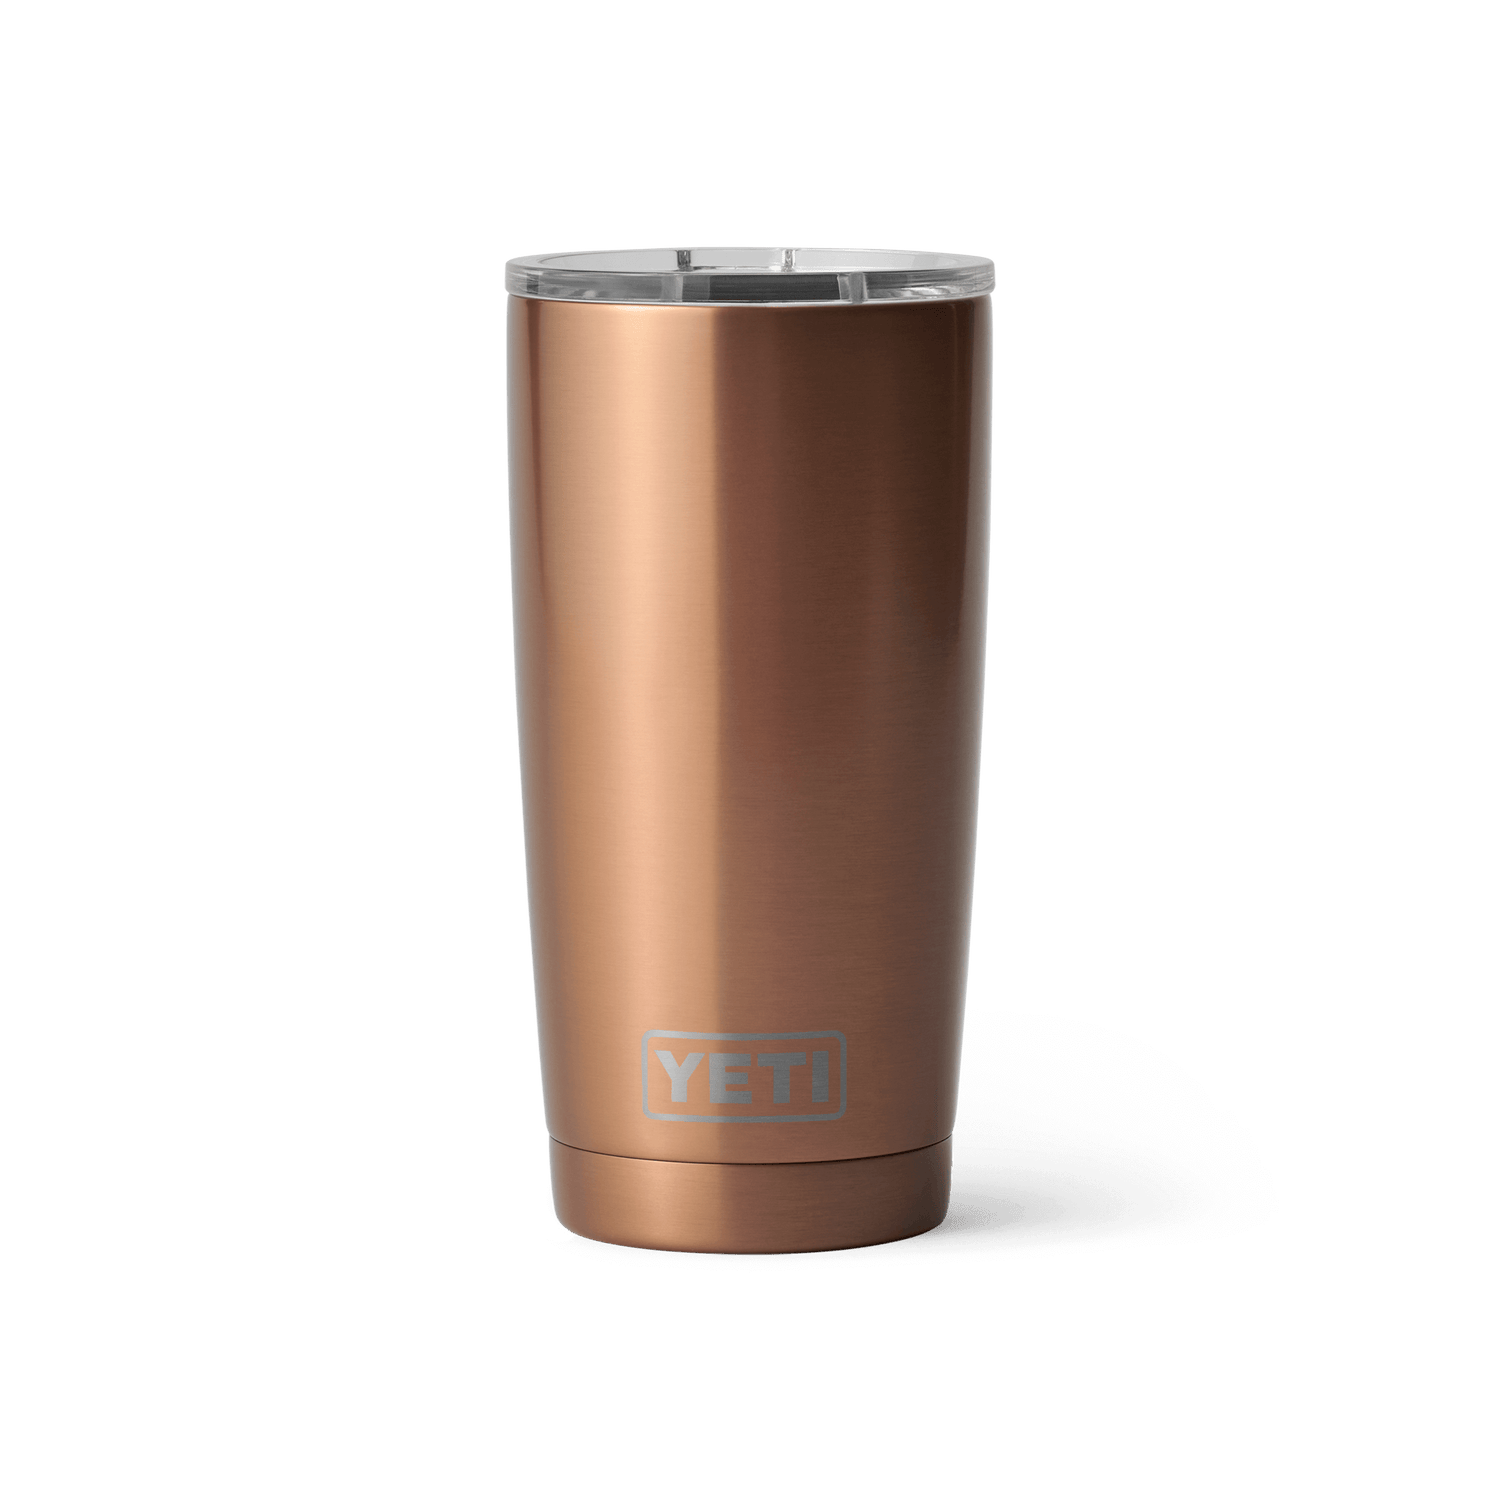 holographic rare mini yeti cup with handle｜TikTok Search